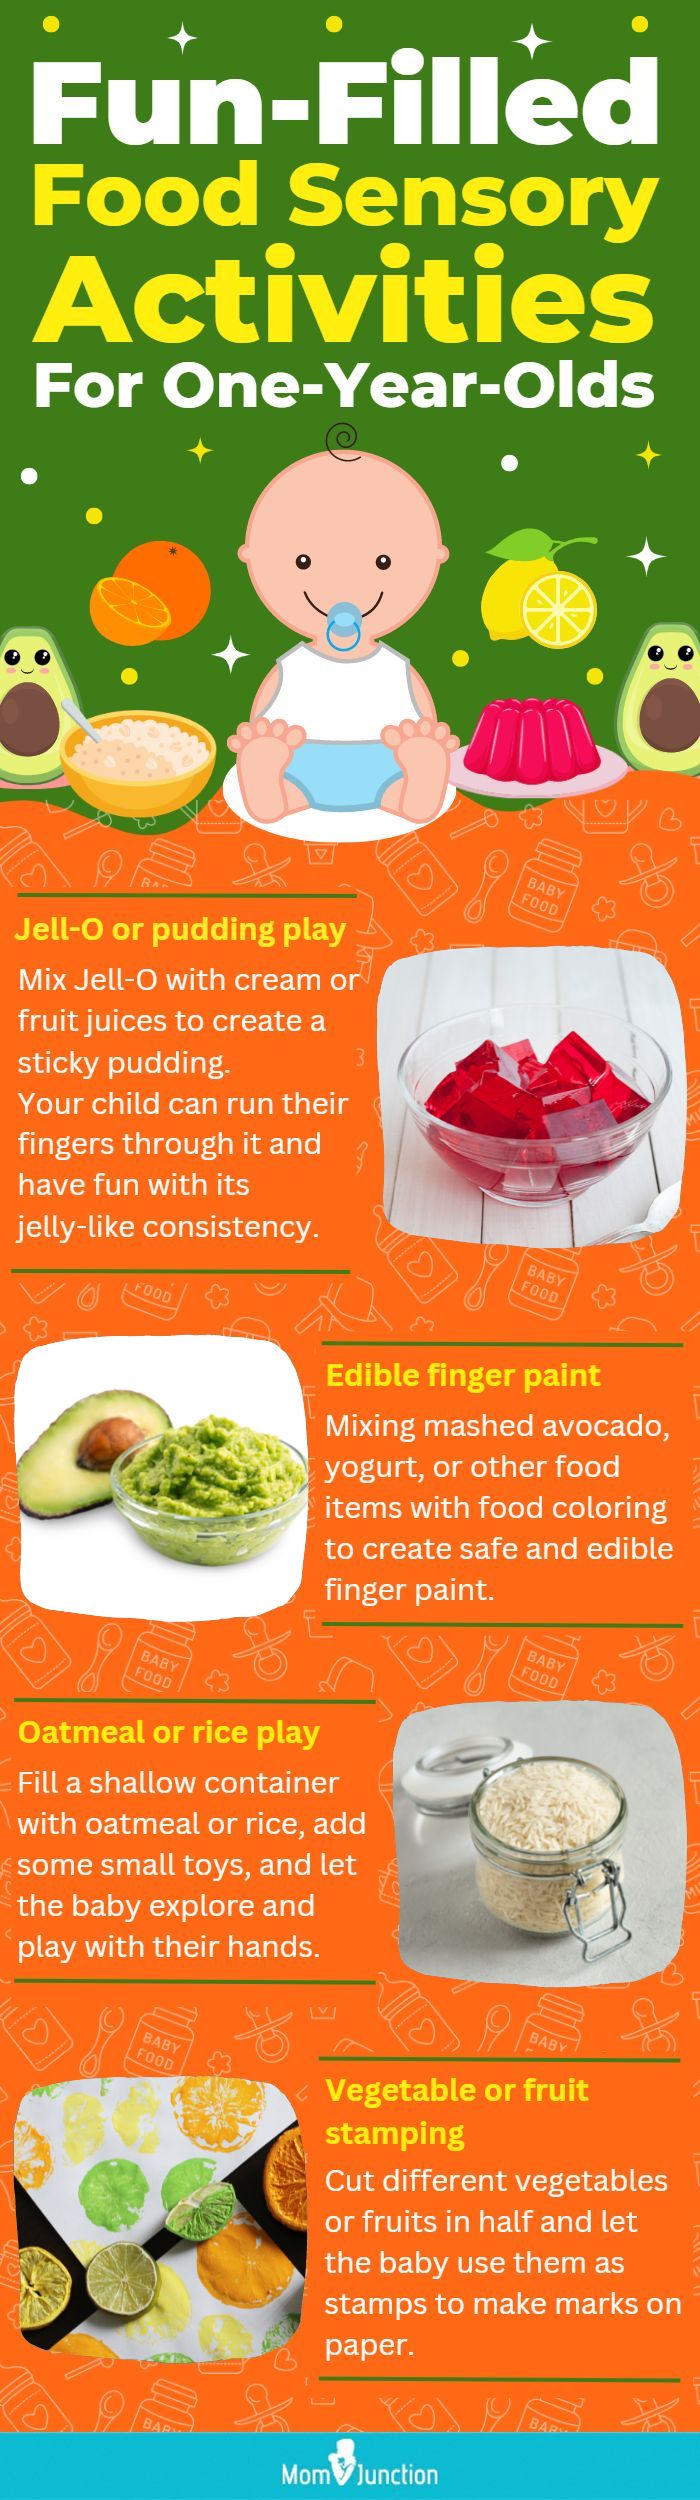 fun filled food sensory activities for one year olds (infographic)